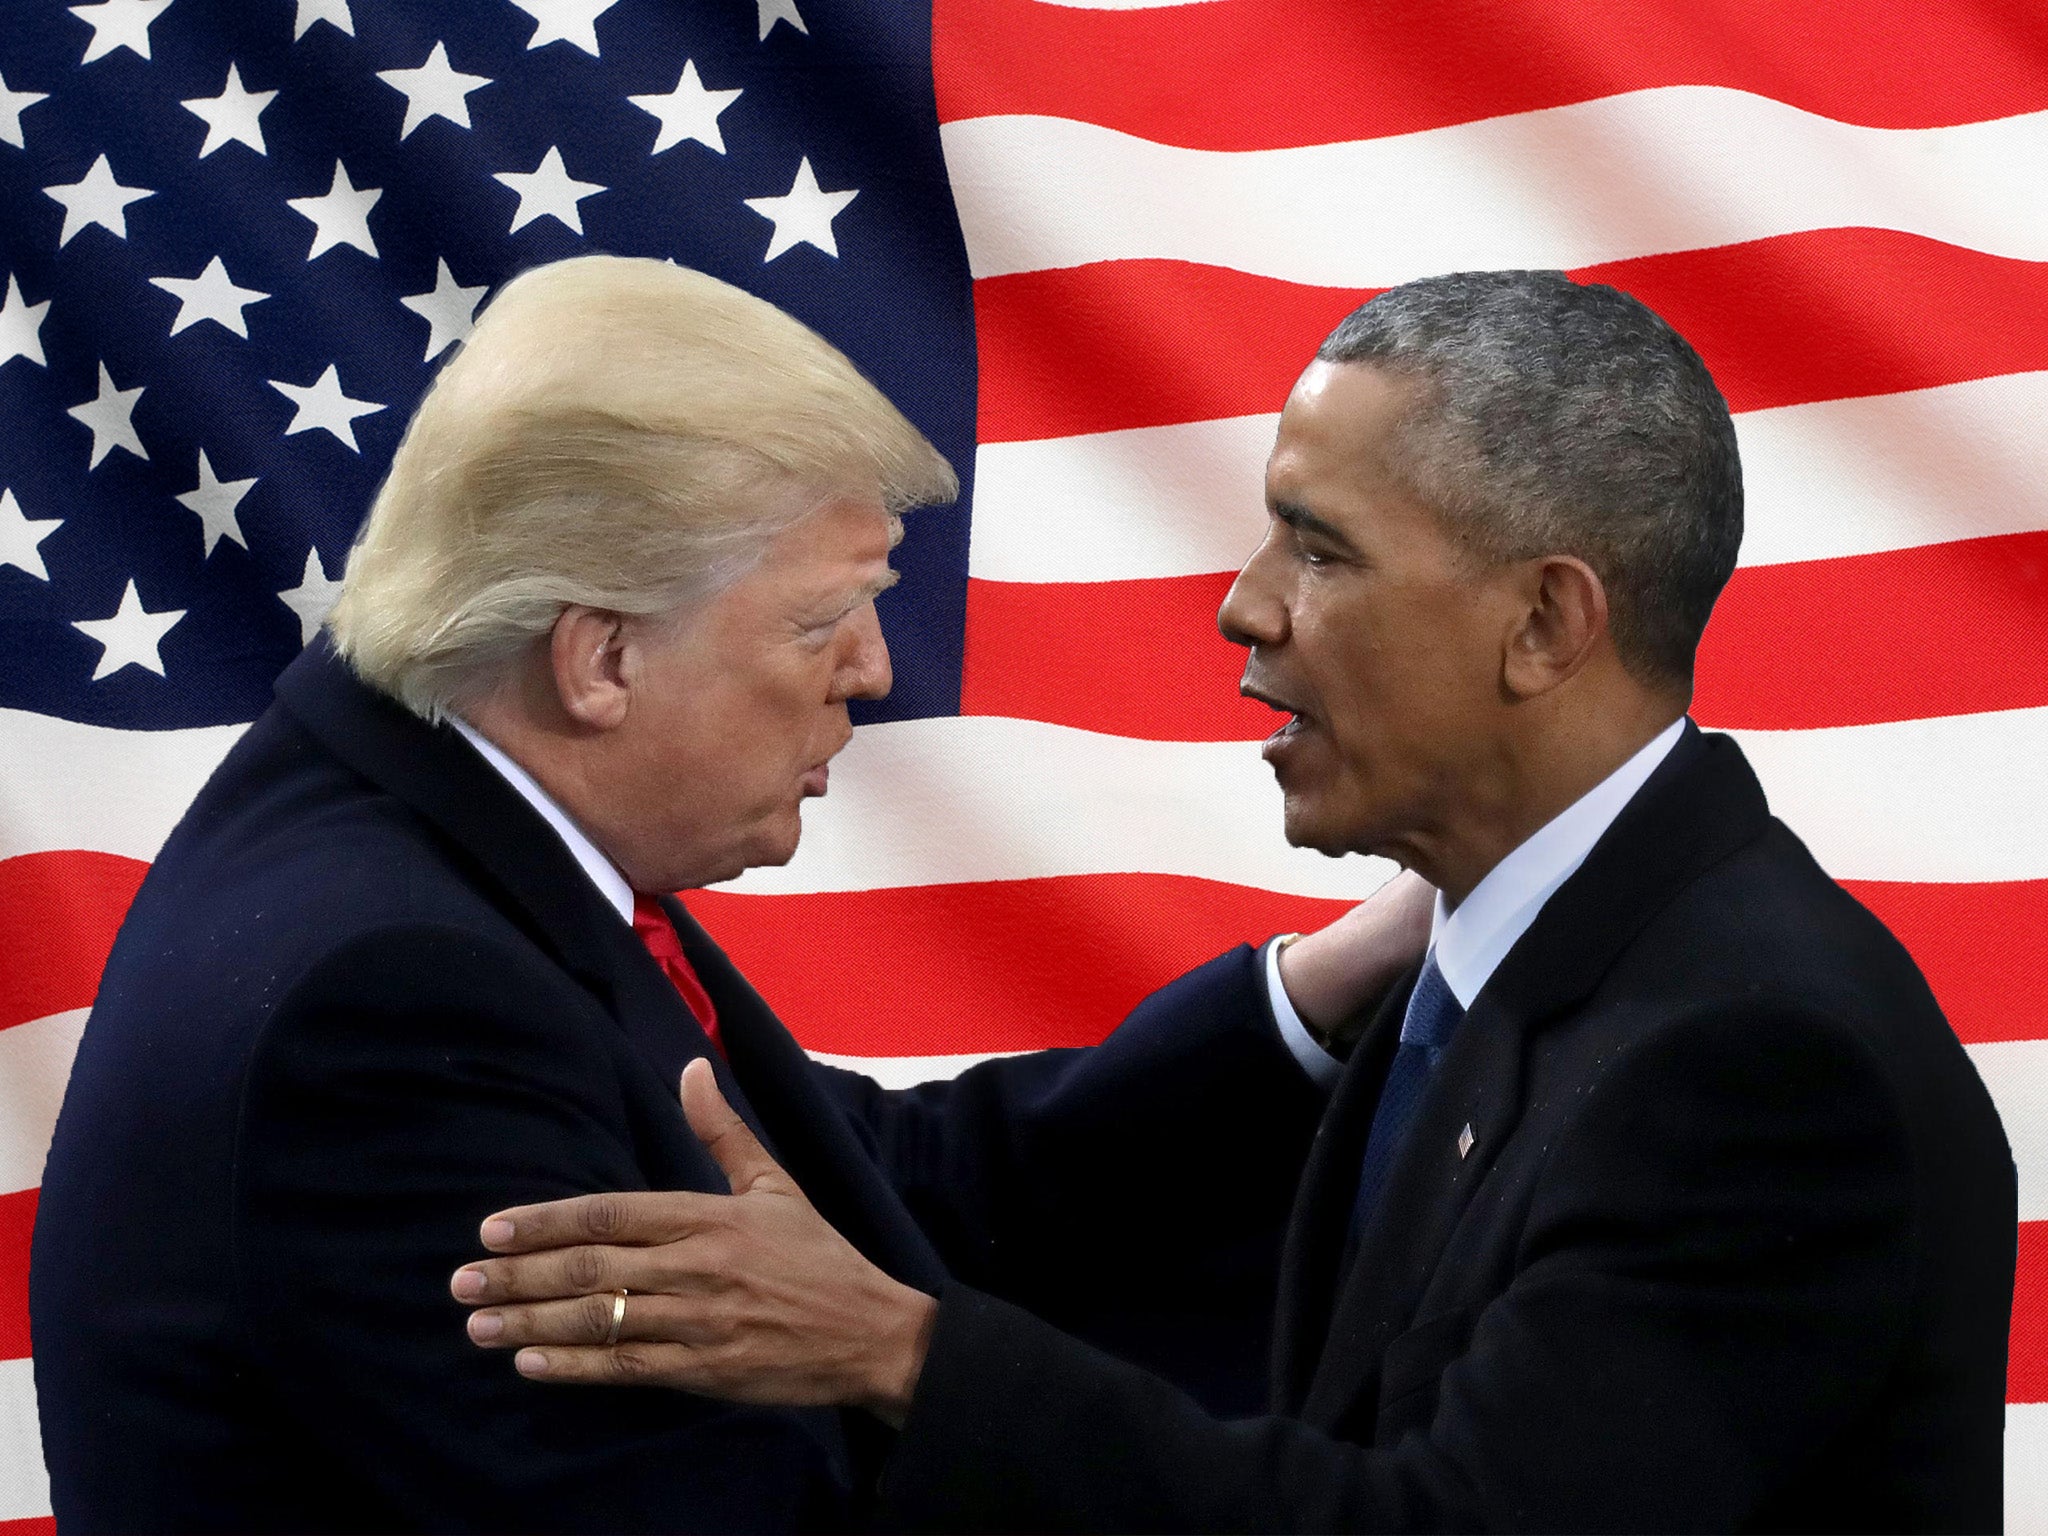 ‘Obama’s America is the future. Trump’s America is the last throes of a bygone era’